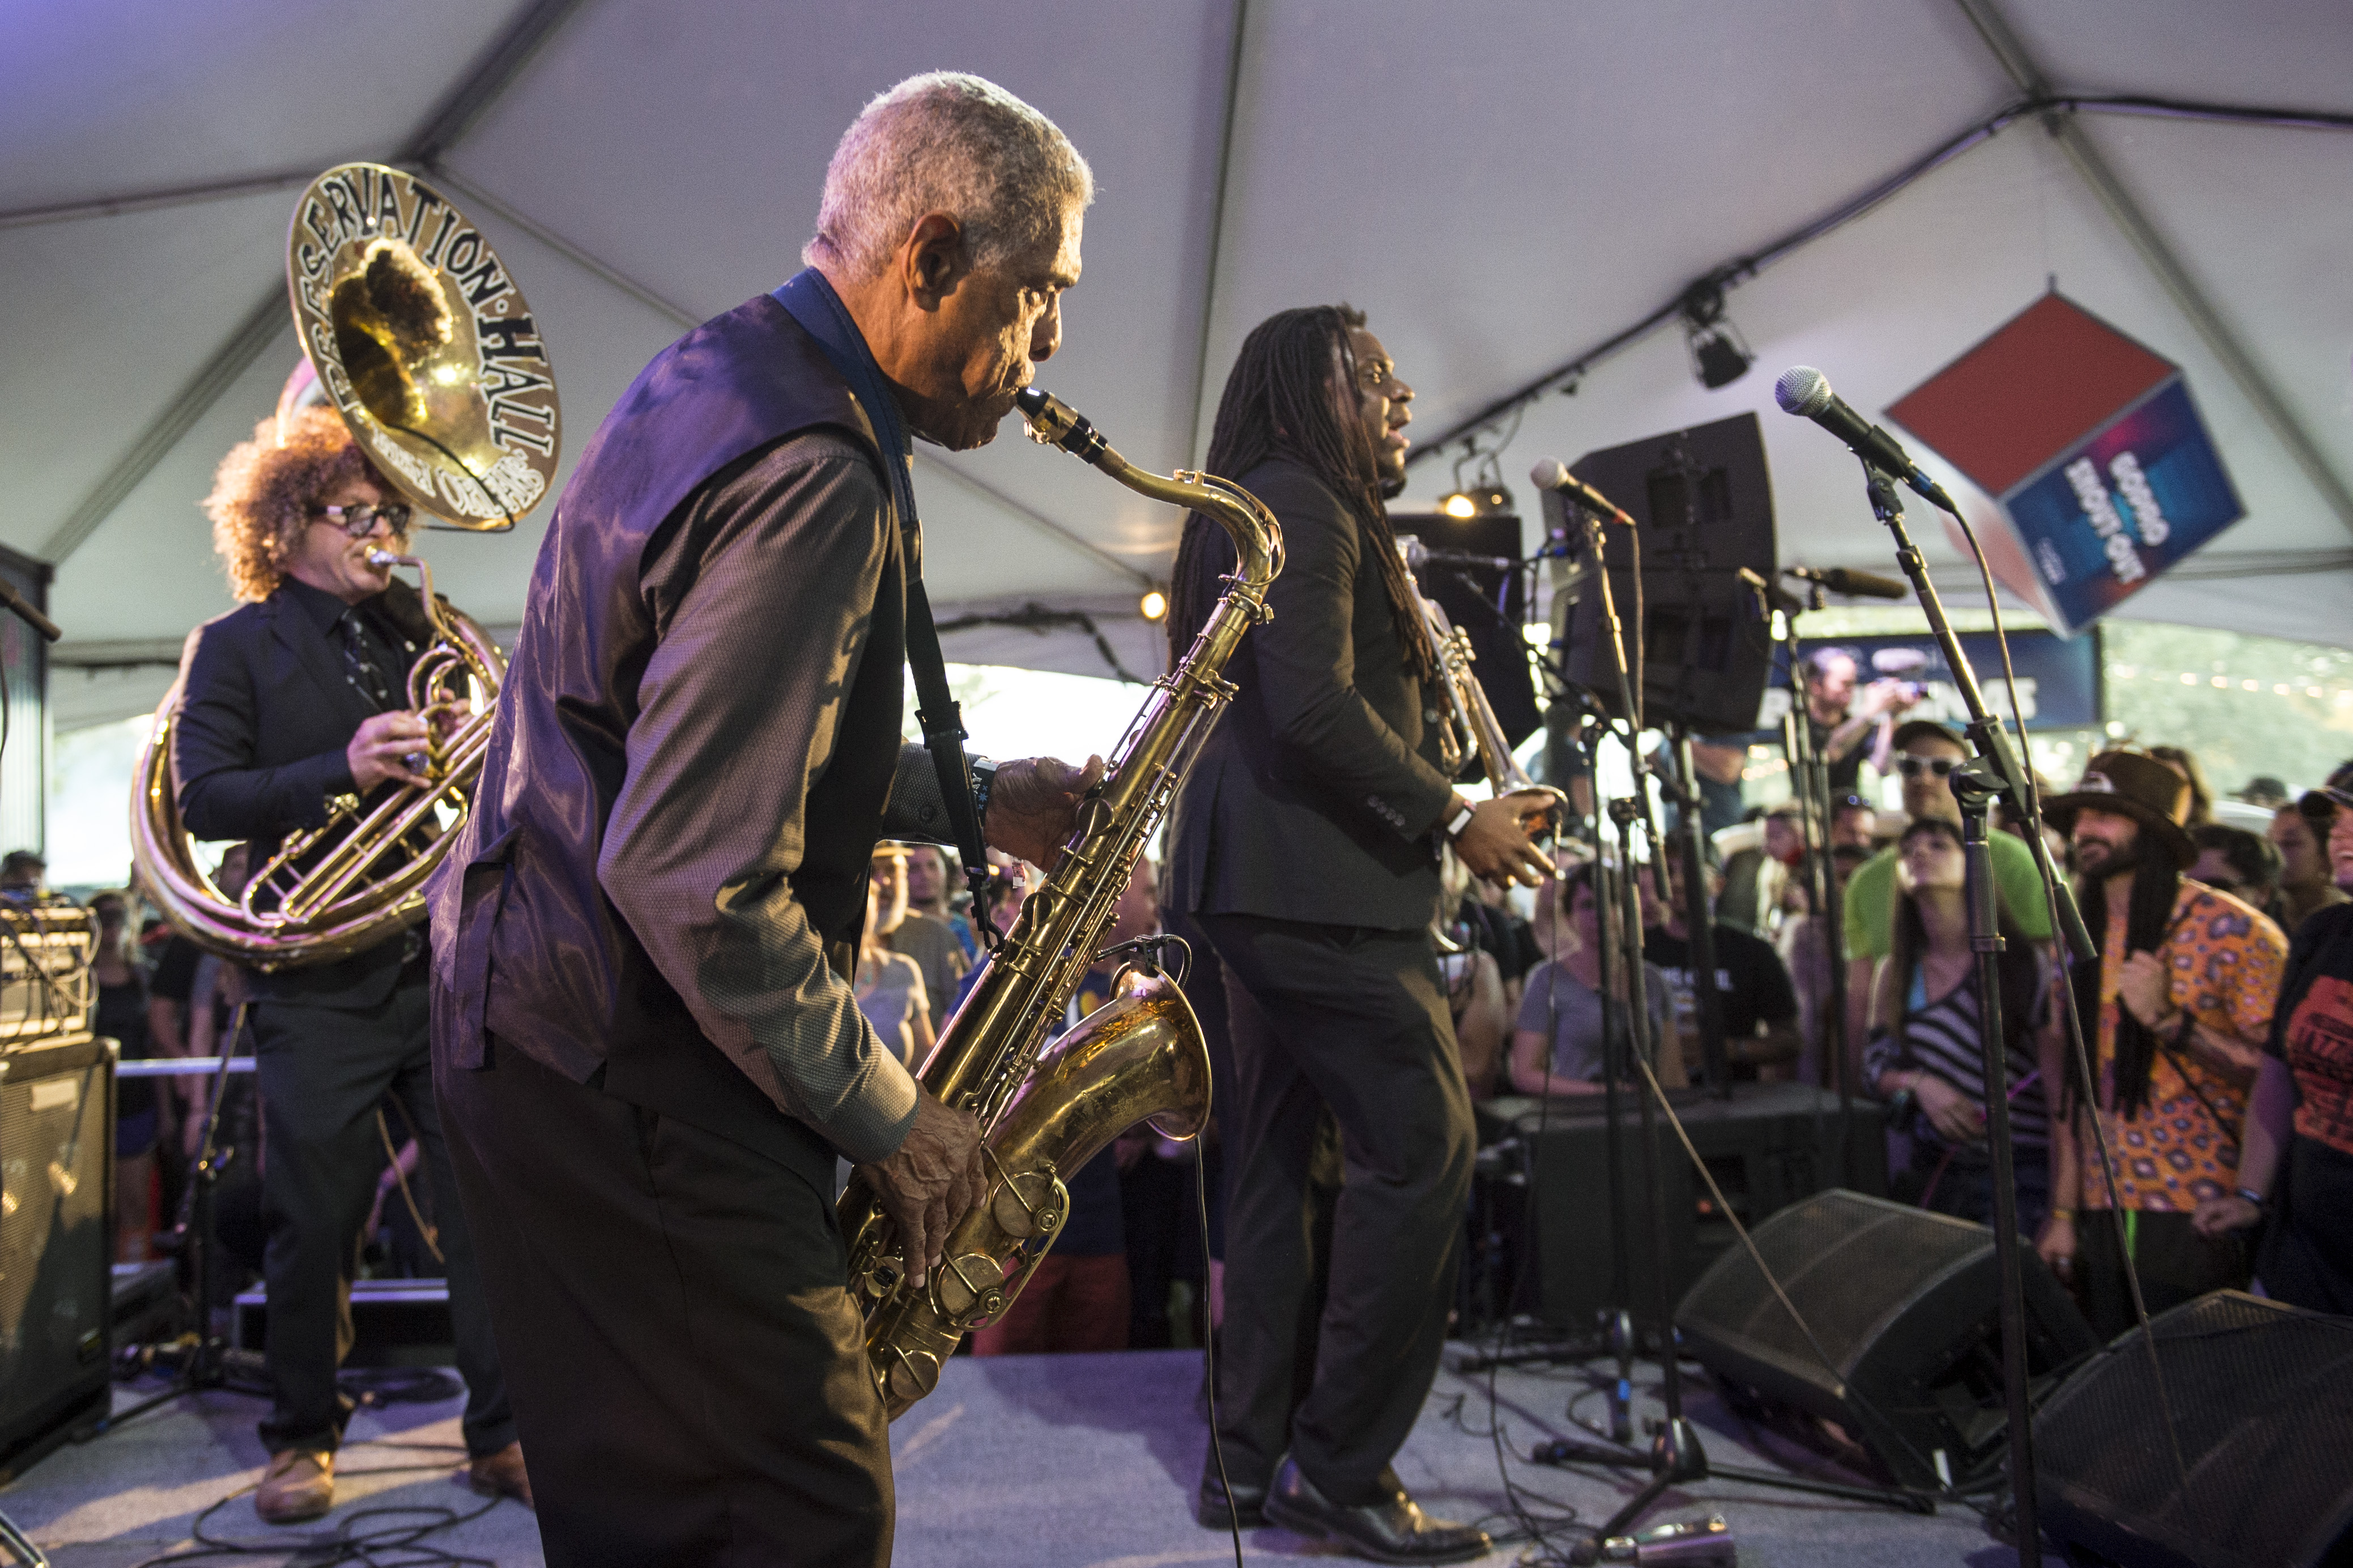 SPIN at Voodoo 2016: Day 3 at Toyota Music Den with Preservation Hall Jazz Band and More